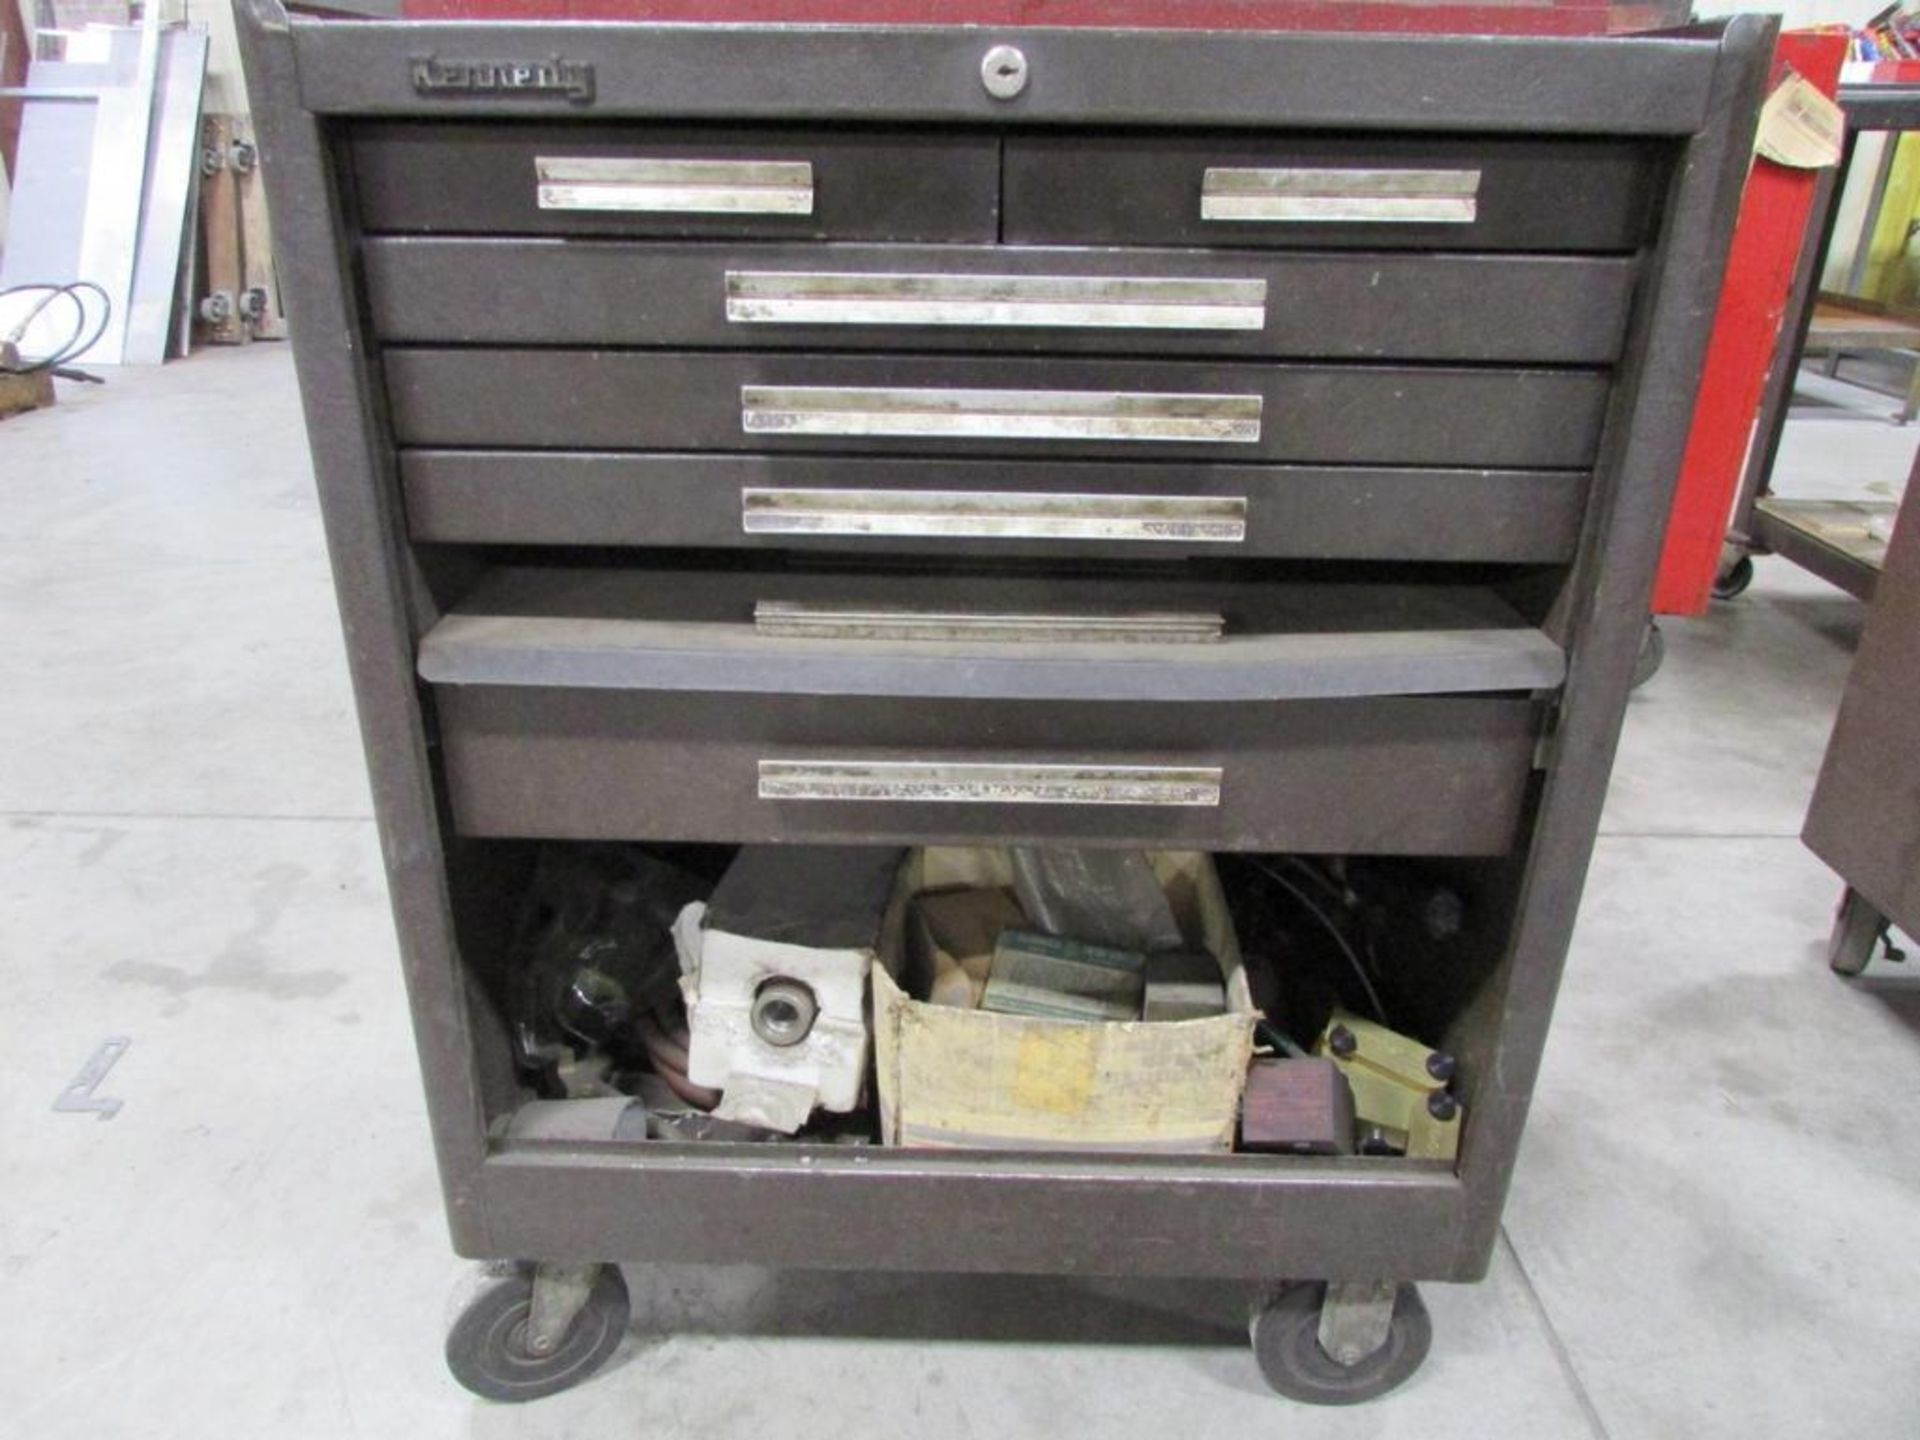 Kennedy 6-Drawer Rolling Tool Box with Open Top 2-Drawer Tool Box, Assorted Hand Tools and Contents - Image 2 of 7